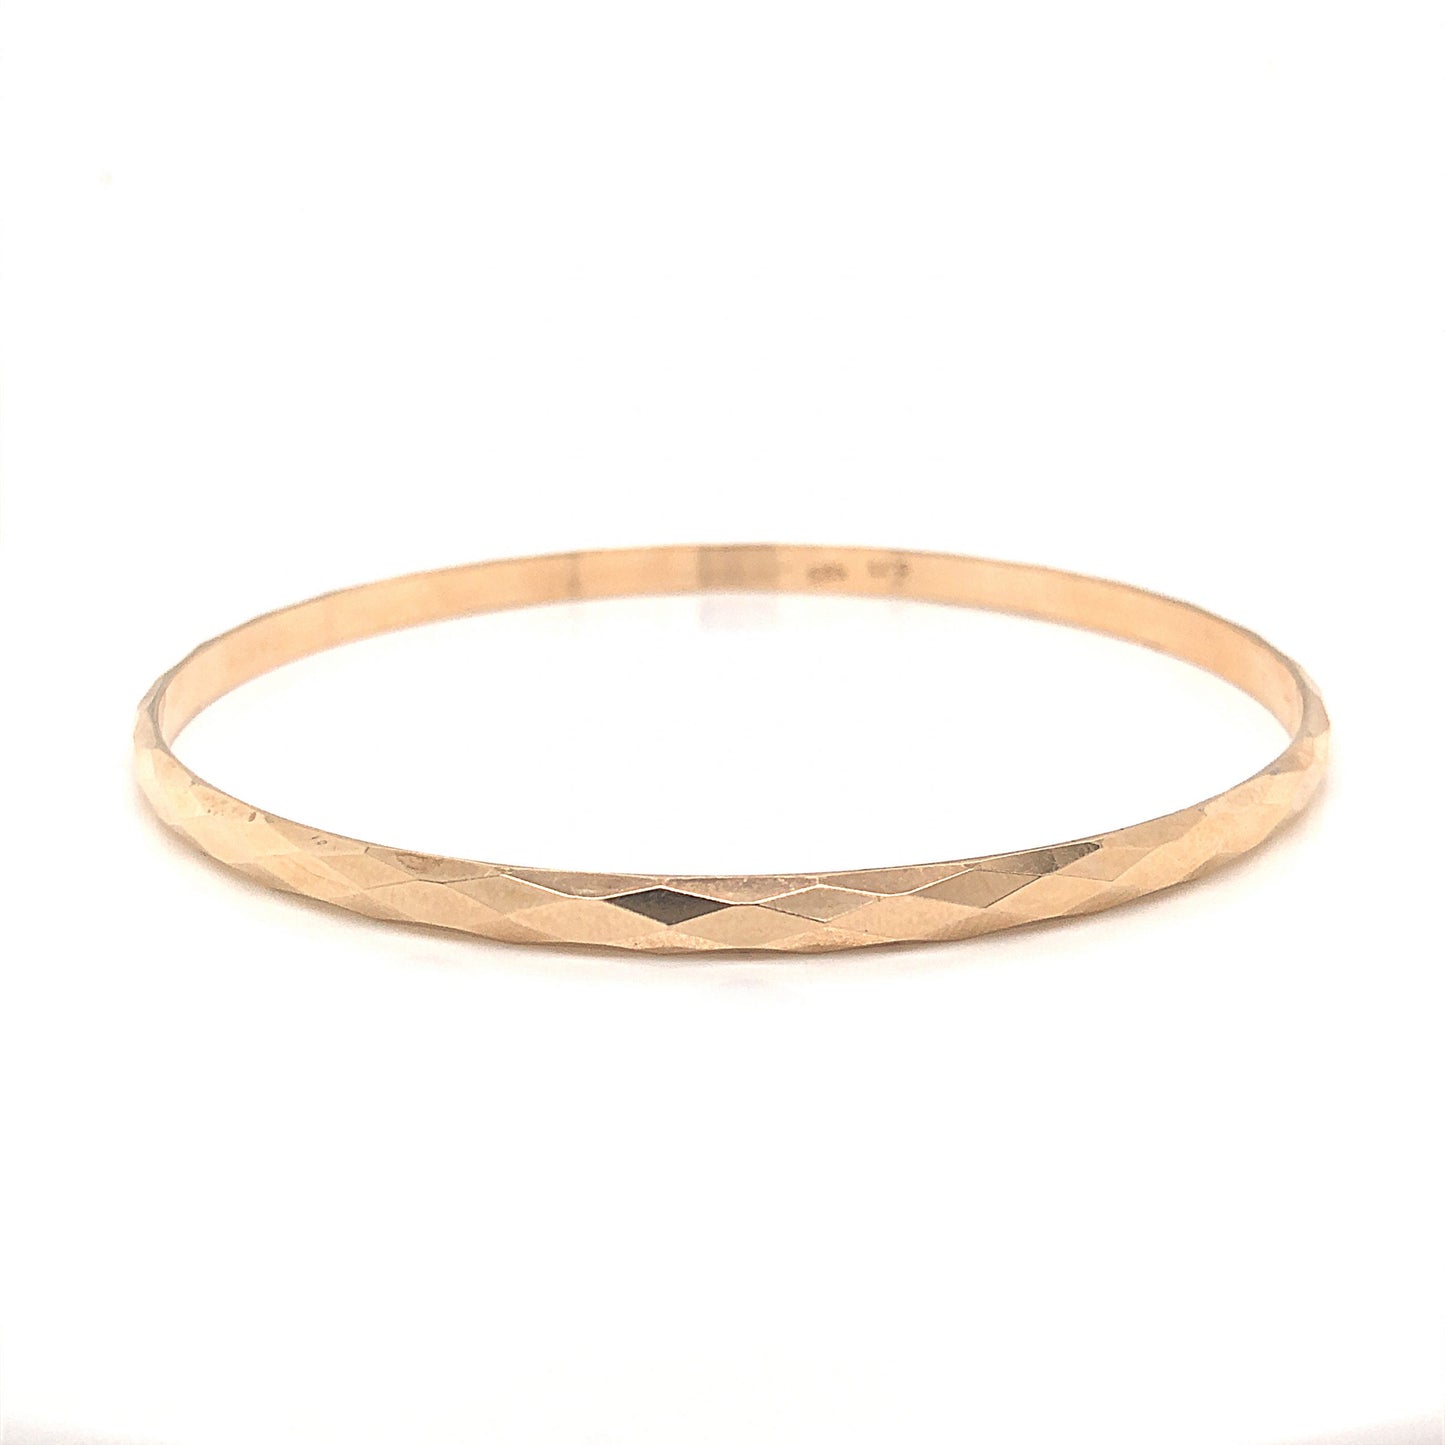 Faceted Bangle Bracelet in 14k Yellow Gold